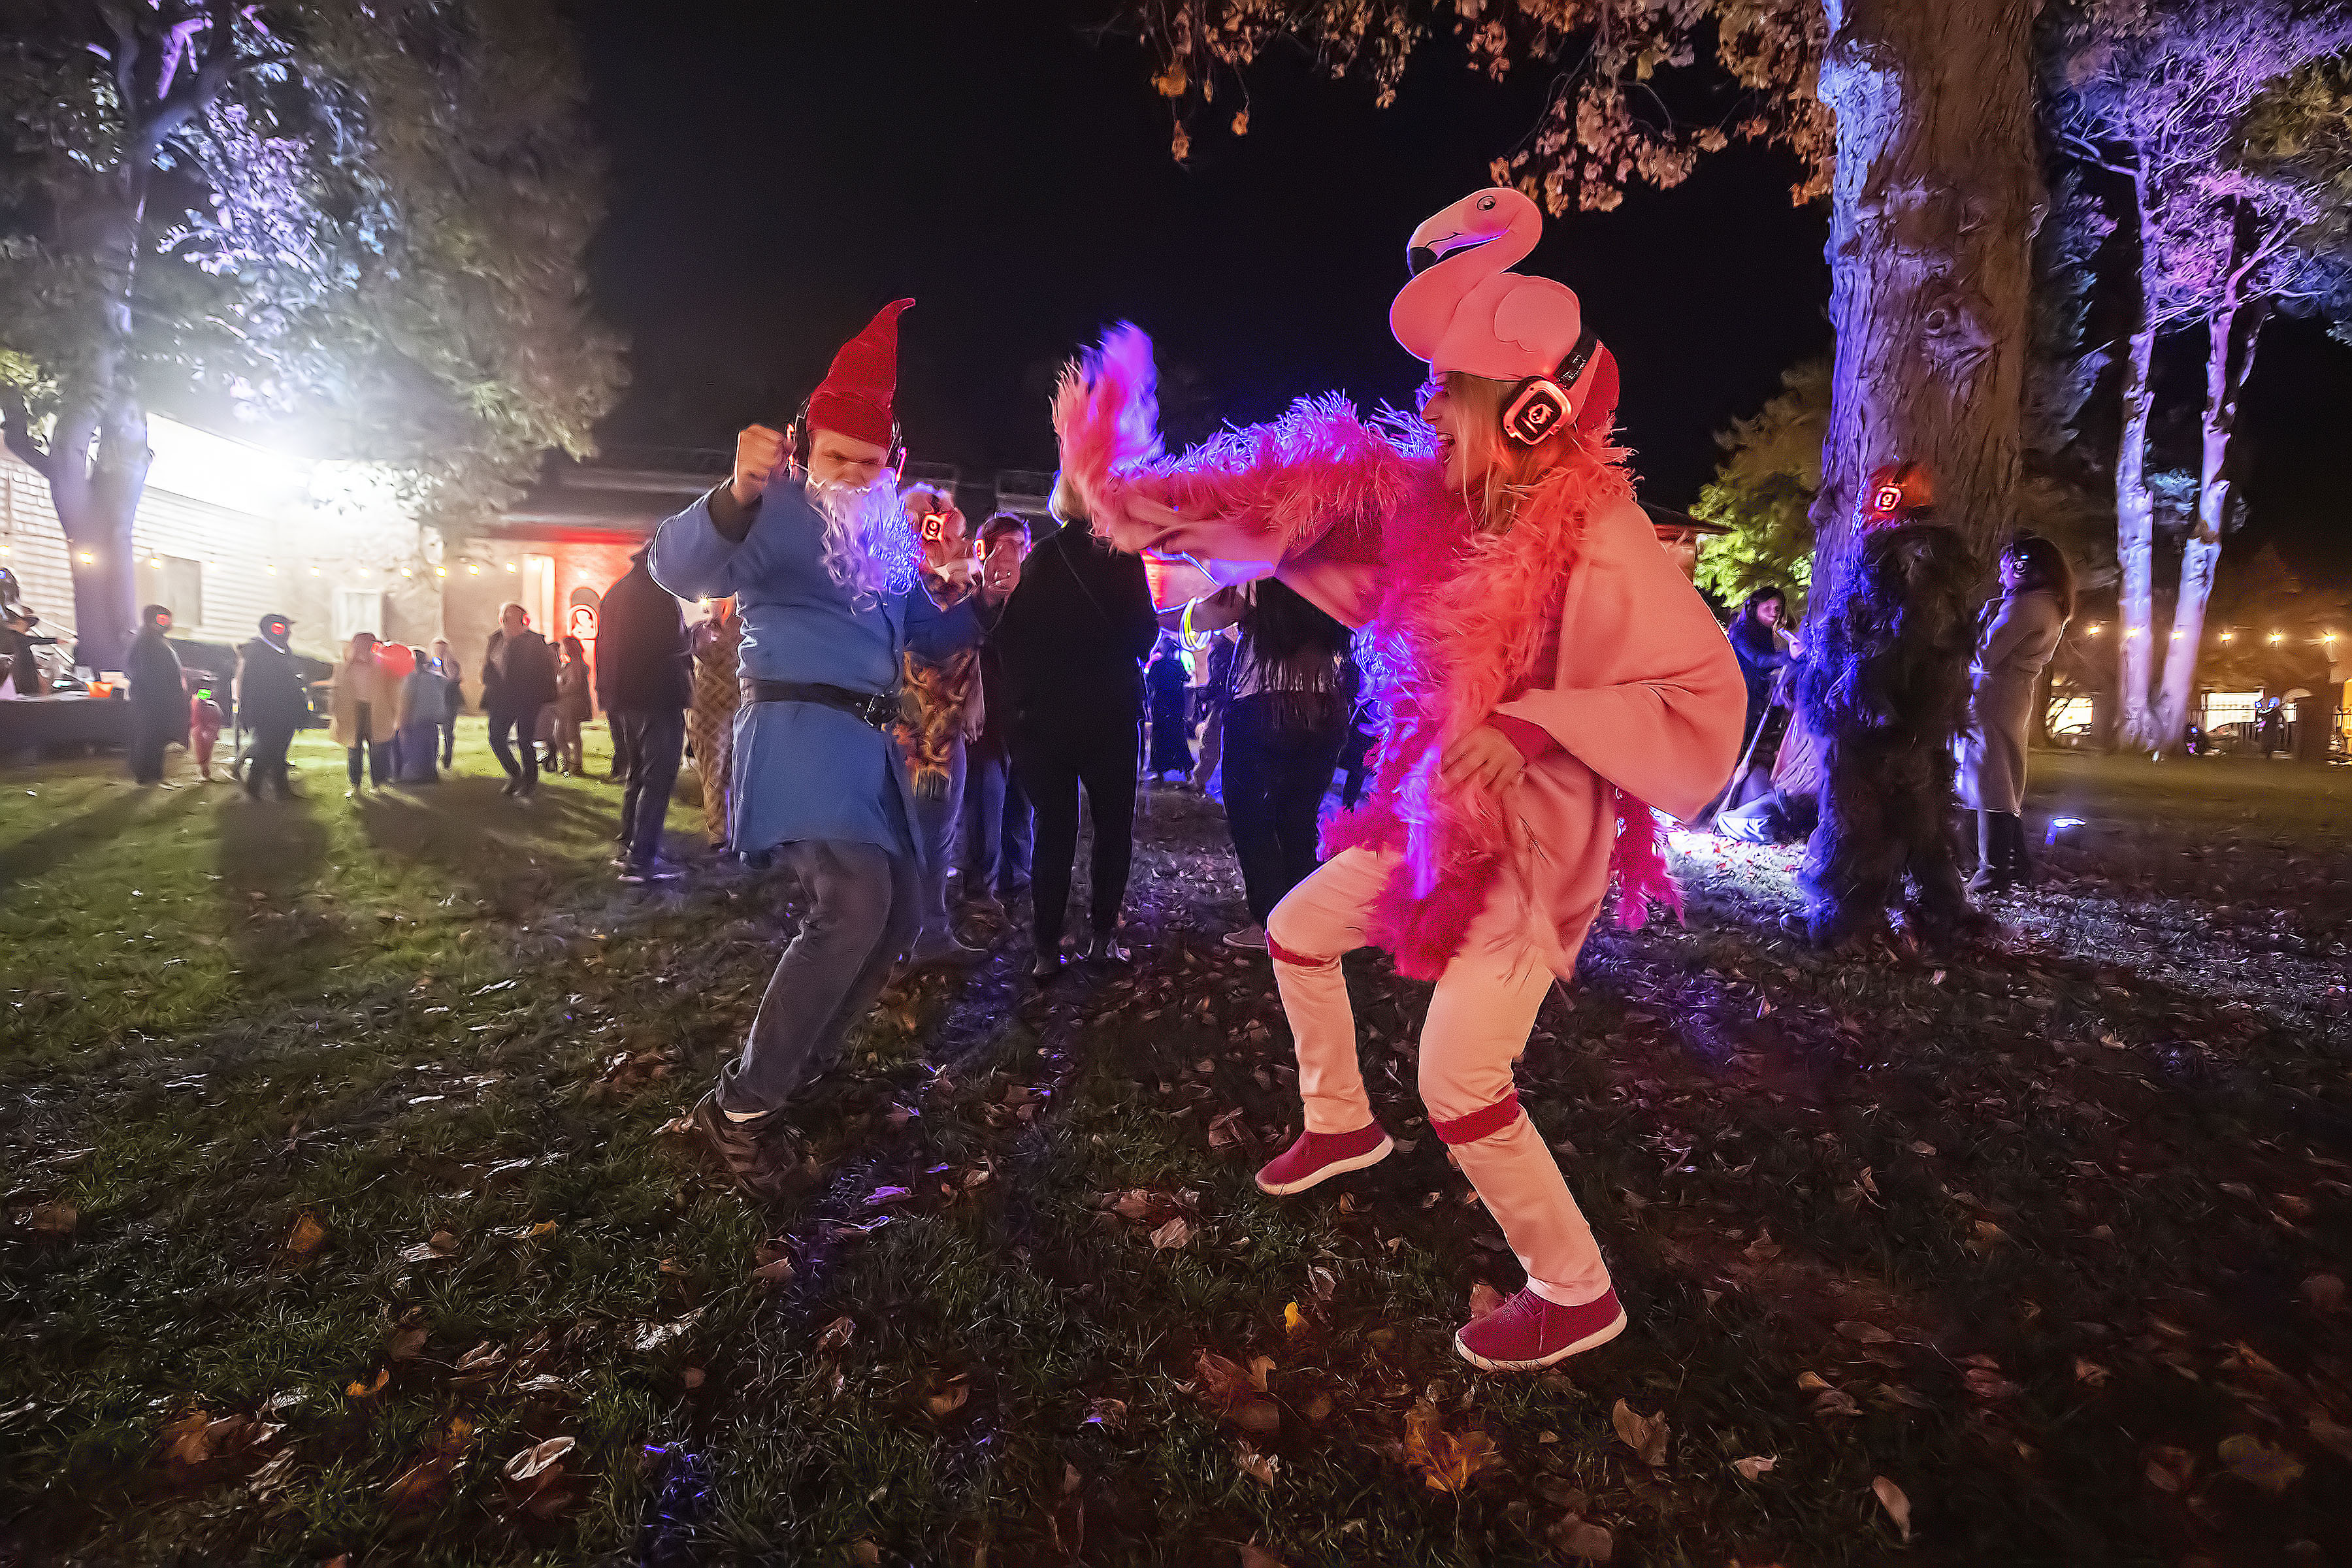 Flamingo Cindy Lenkiewicz and Gnome David Polek cut the rug during the Halloween Silent Disco Party sponsored by the Southampton Arts Center on Saturday night.  MICHAEL HELLER